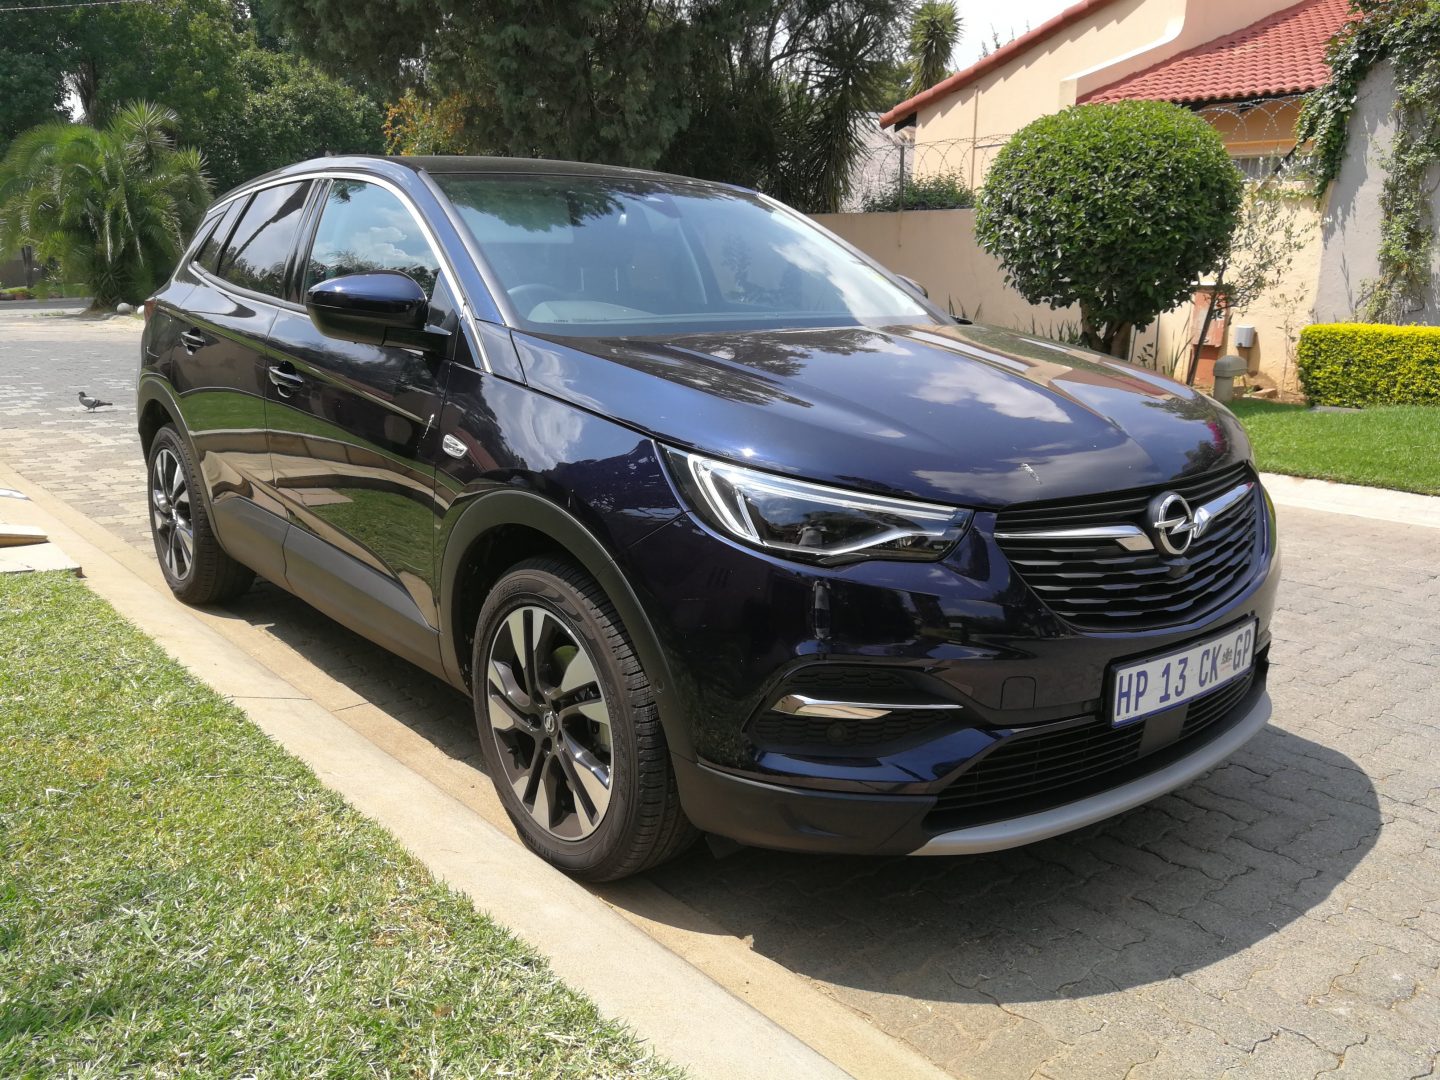 The Opel Grandland X has some standout features. - You, Baby and I